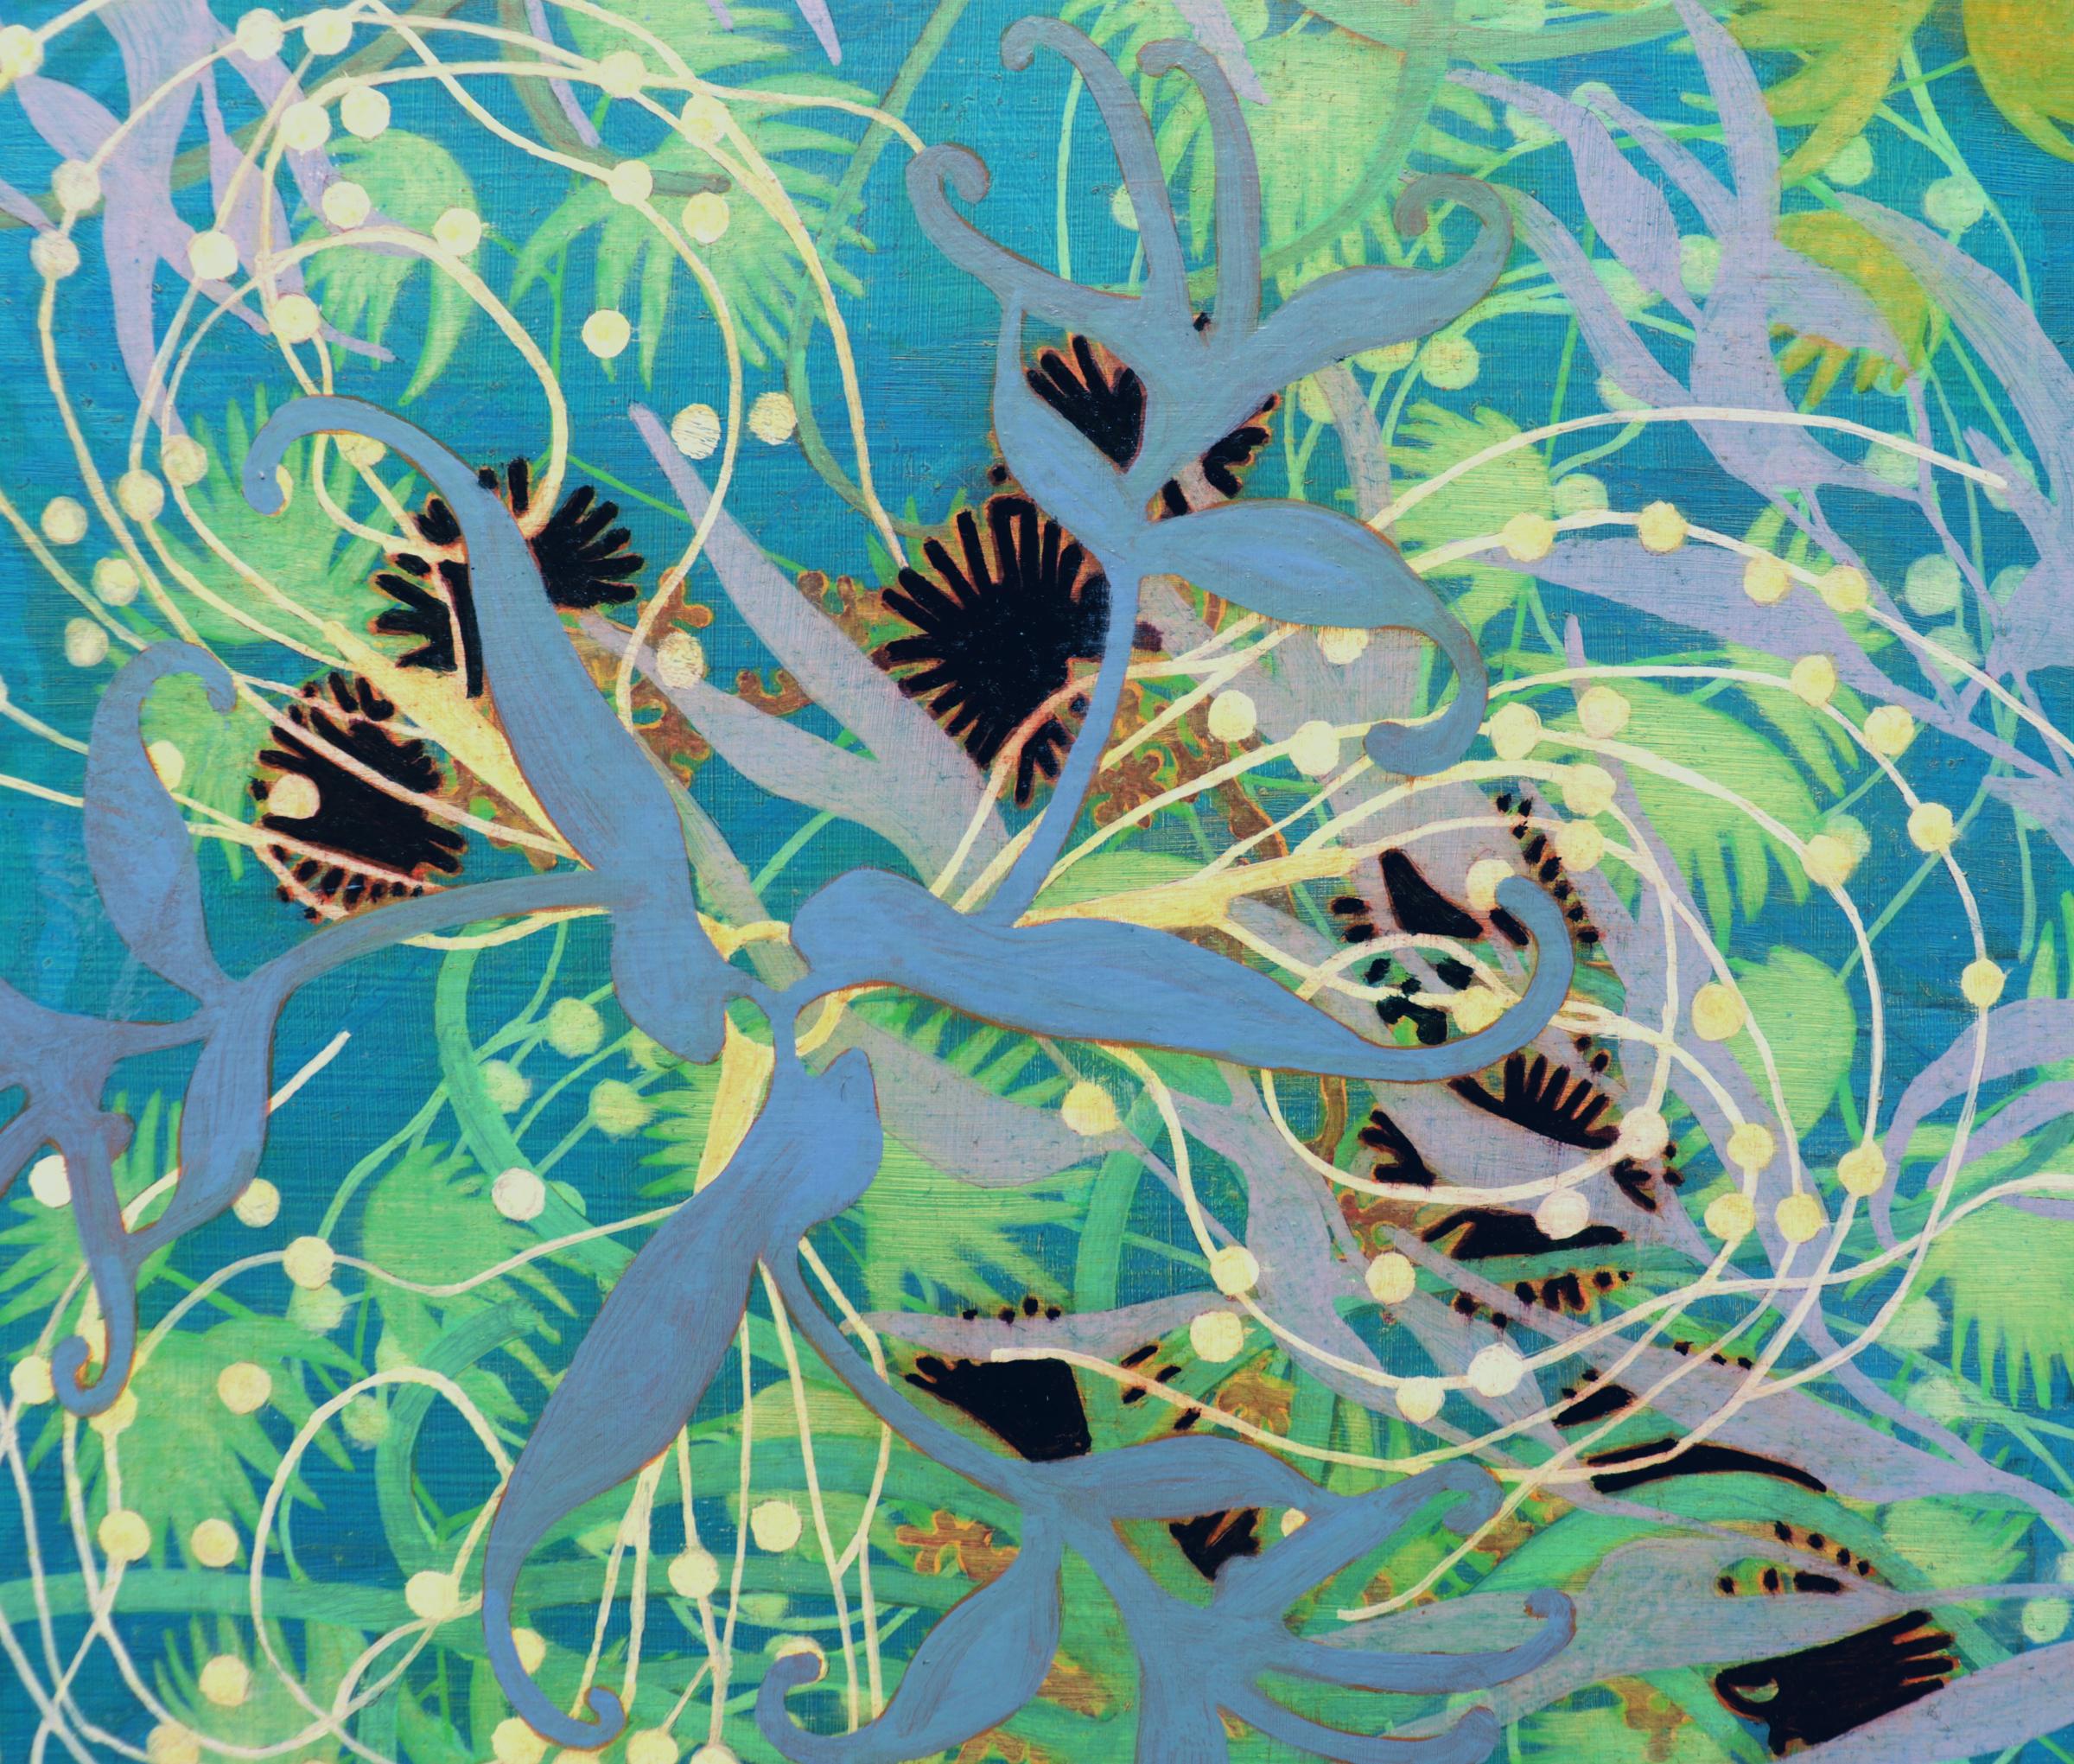 Annette Davidek creates paintings that look like gorgeous biomes full of naturalistic forms, enticing viewers to enter a domain that is as familiar as it is strange. Variously suggestive of exotic plants and animals, or obscure microscopic